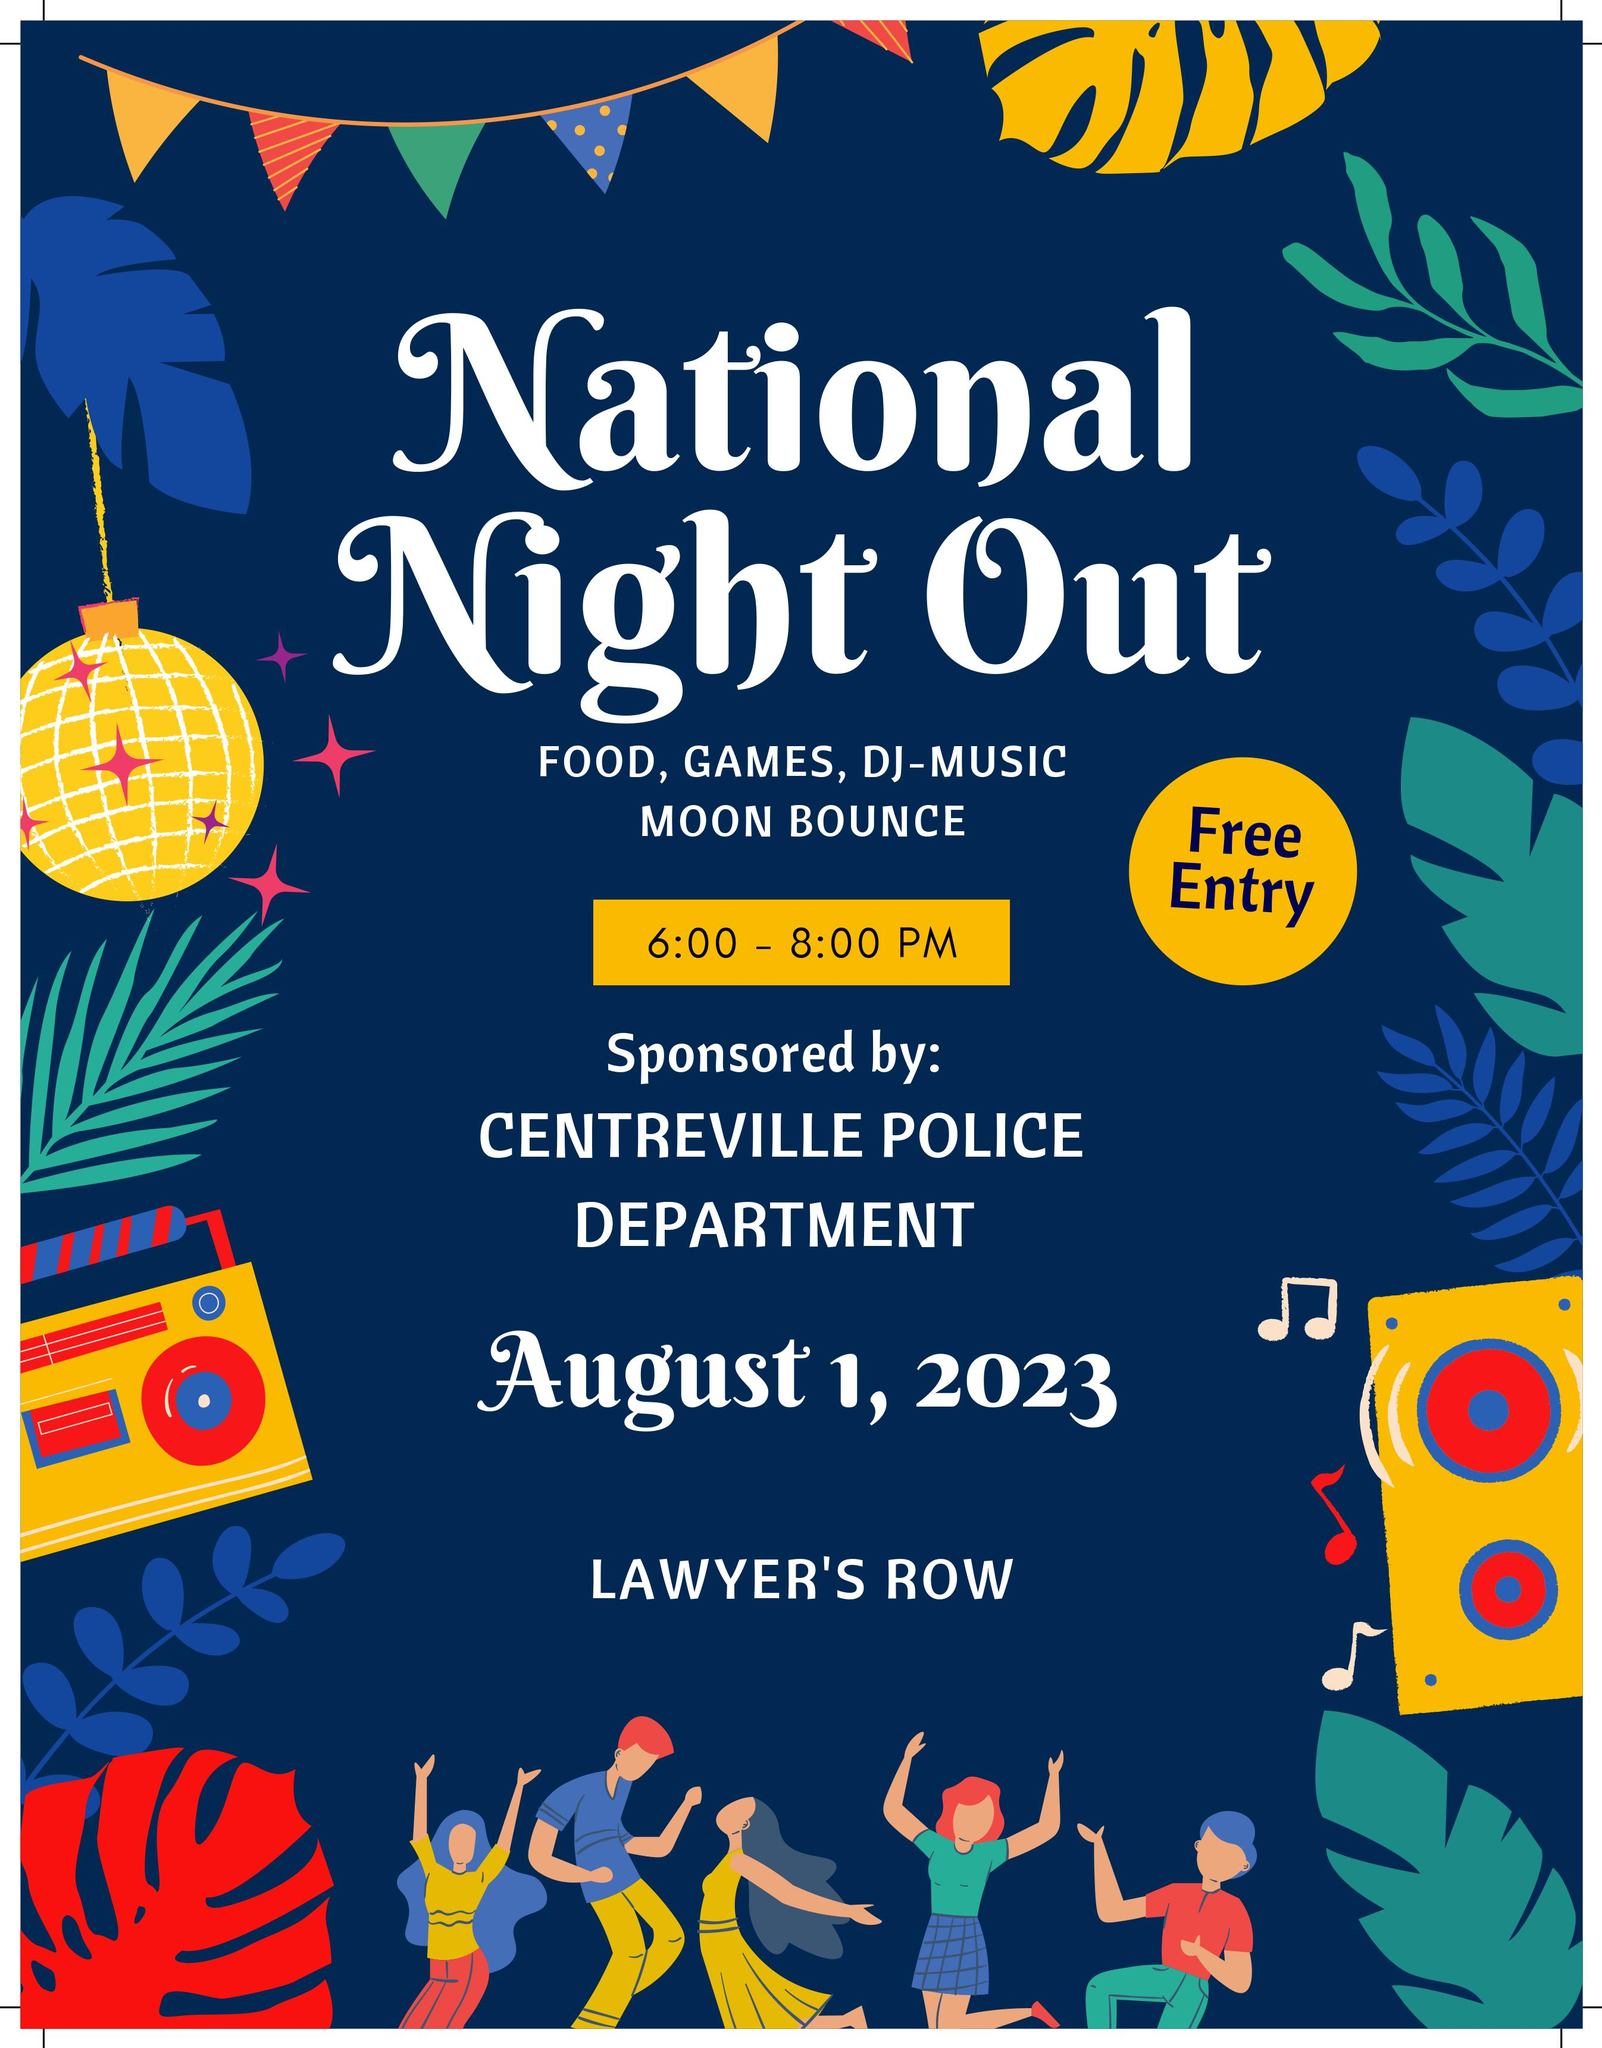 National Night out - Centreville Police Department